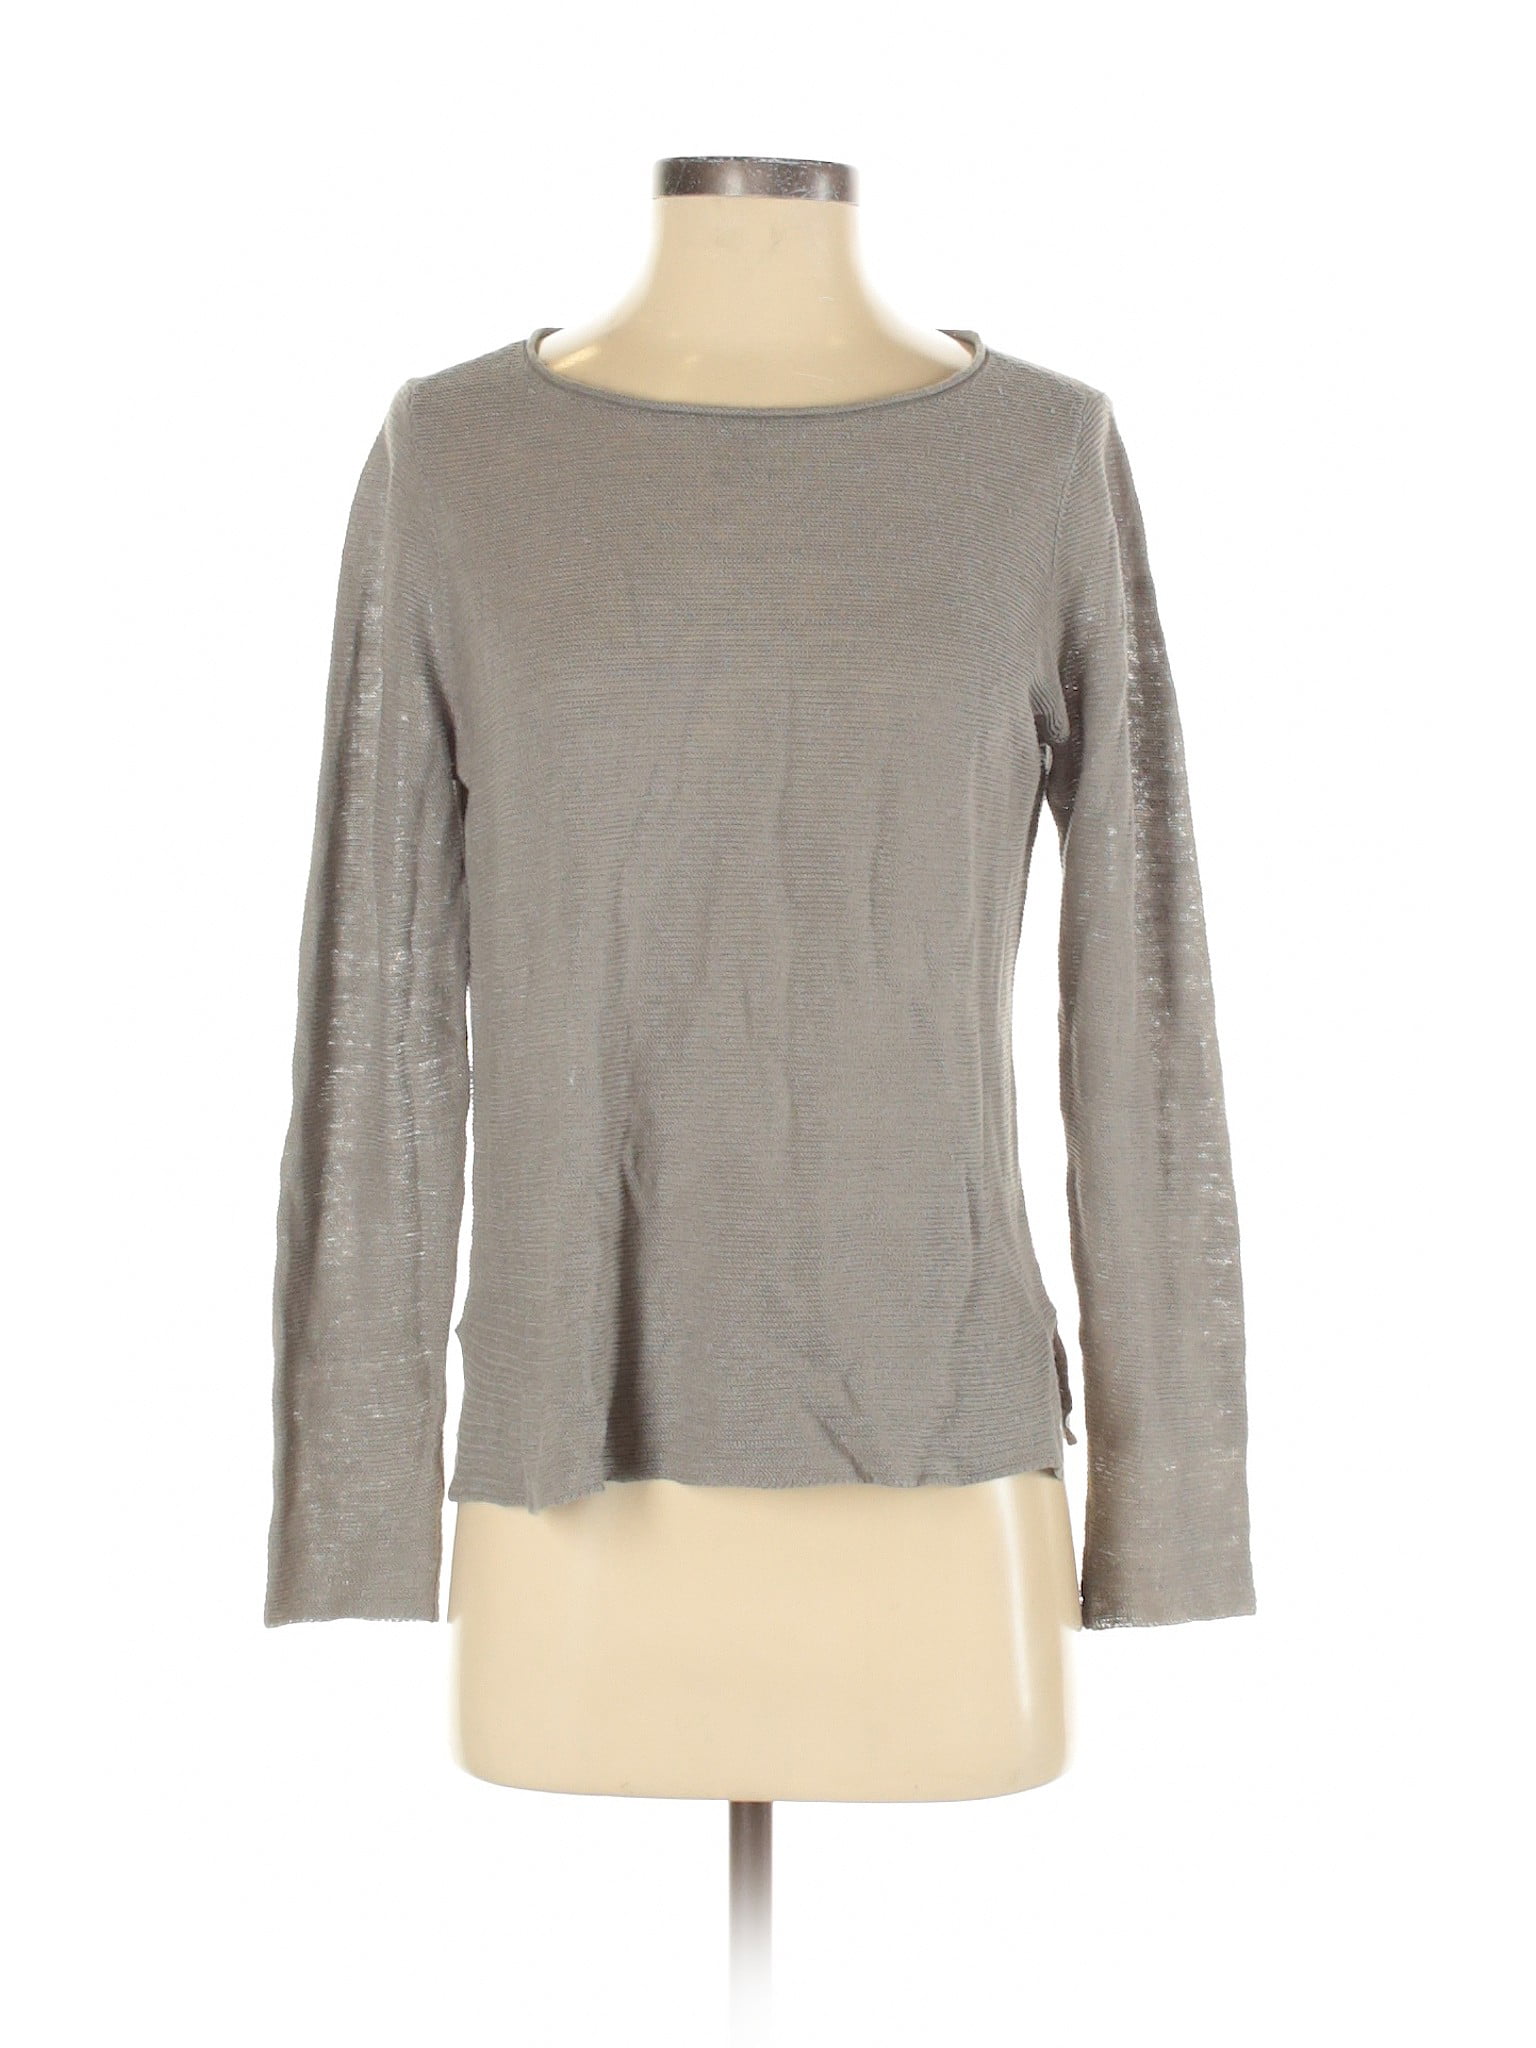 Eileen Fisher - Pre-Owned Eileen Fisher Women's Size S Petite Pullover ...